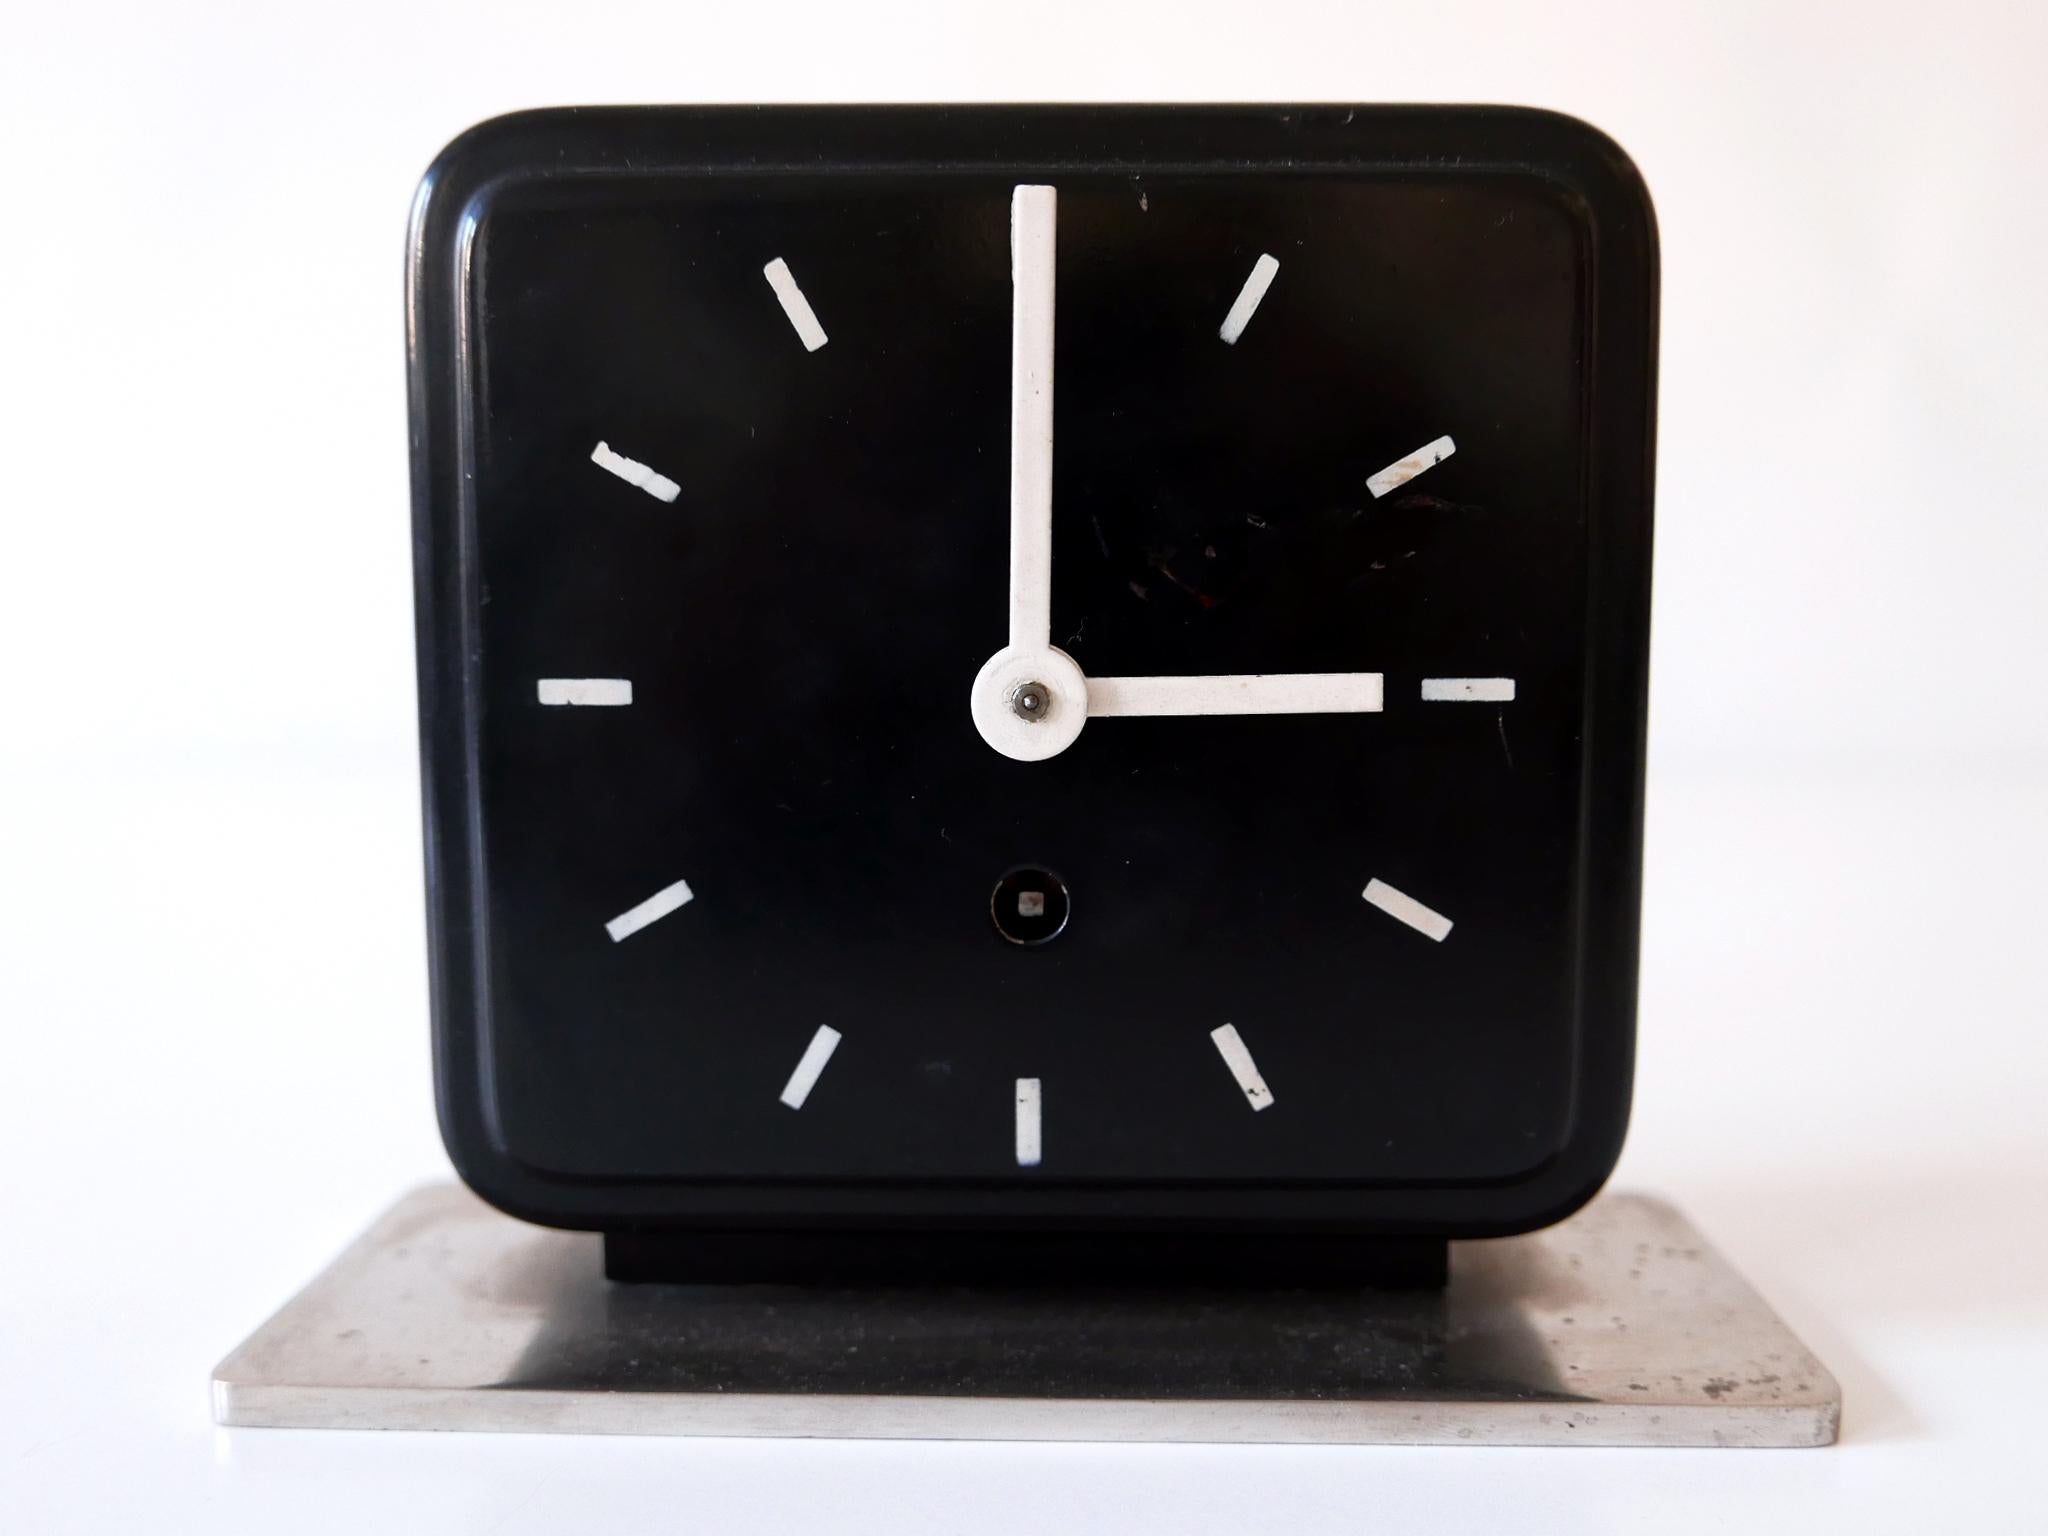 A pure German Bauhaus Design object: table or desk clock by Marianne Brandt. Manufactured by Ruppelwerk, Gotha, Germany, ca. 1932. With original mechanical 8 days clock work. With key.

Originally owned by Singer Nähmaschinen Aktiengesellschaft.